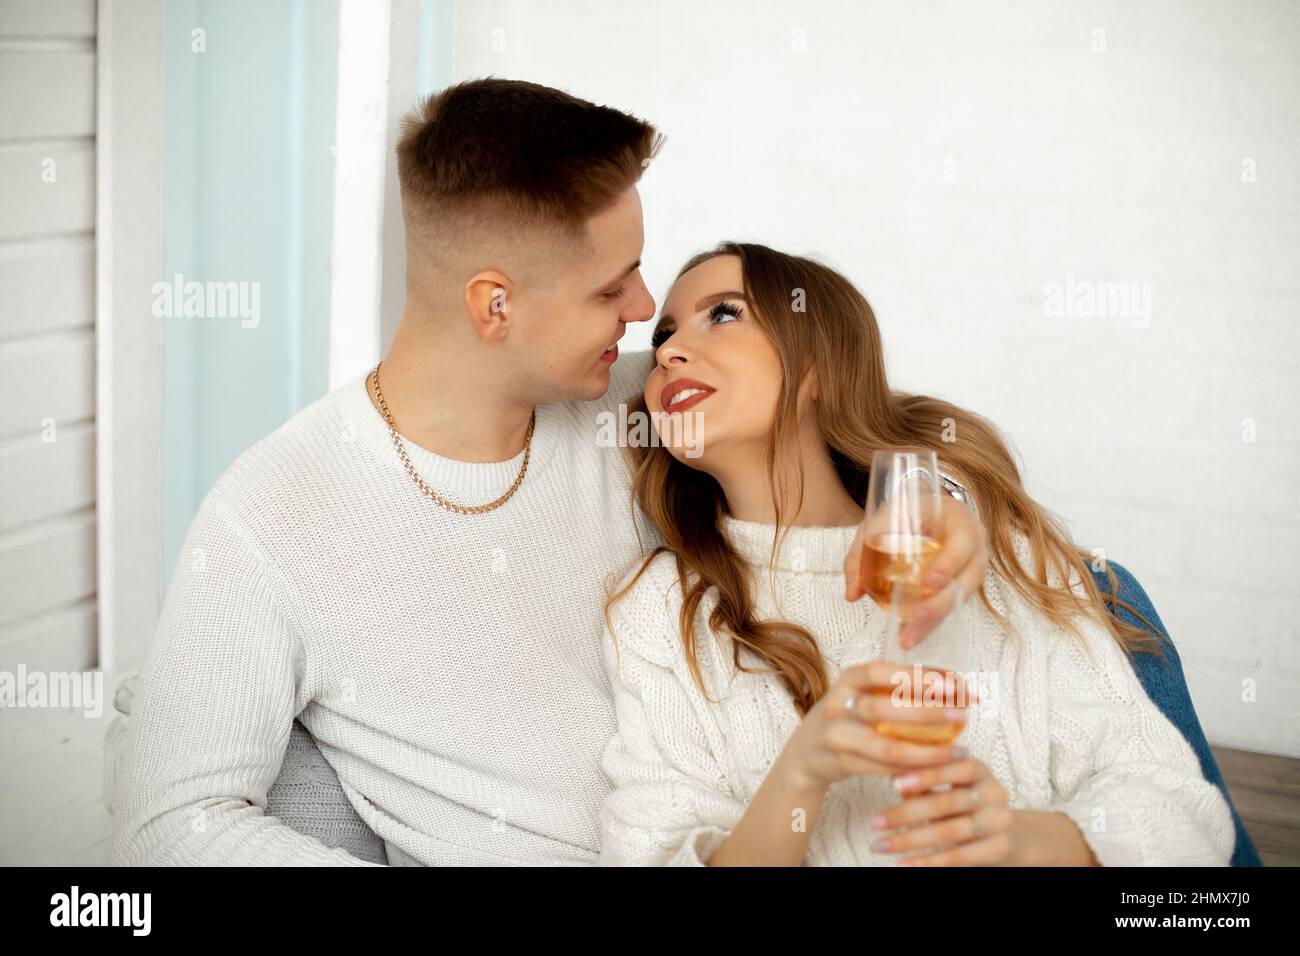 Young girl with brown hair looks at her lover, pressing her back to him, he hugs her shoulders. They are sitting in room with glasses of wine Stock Photo